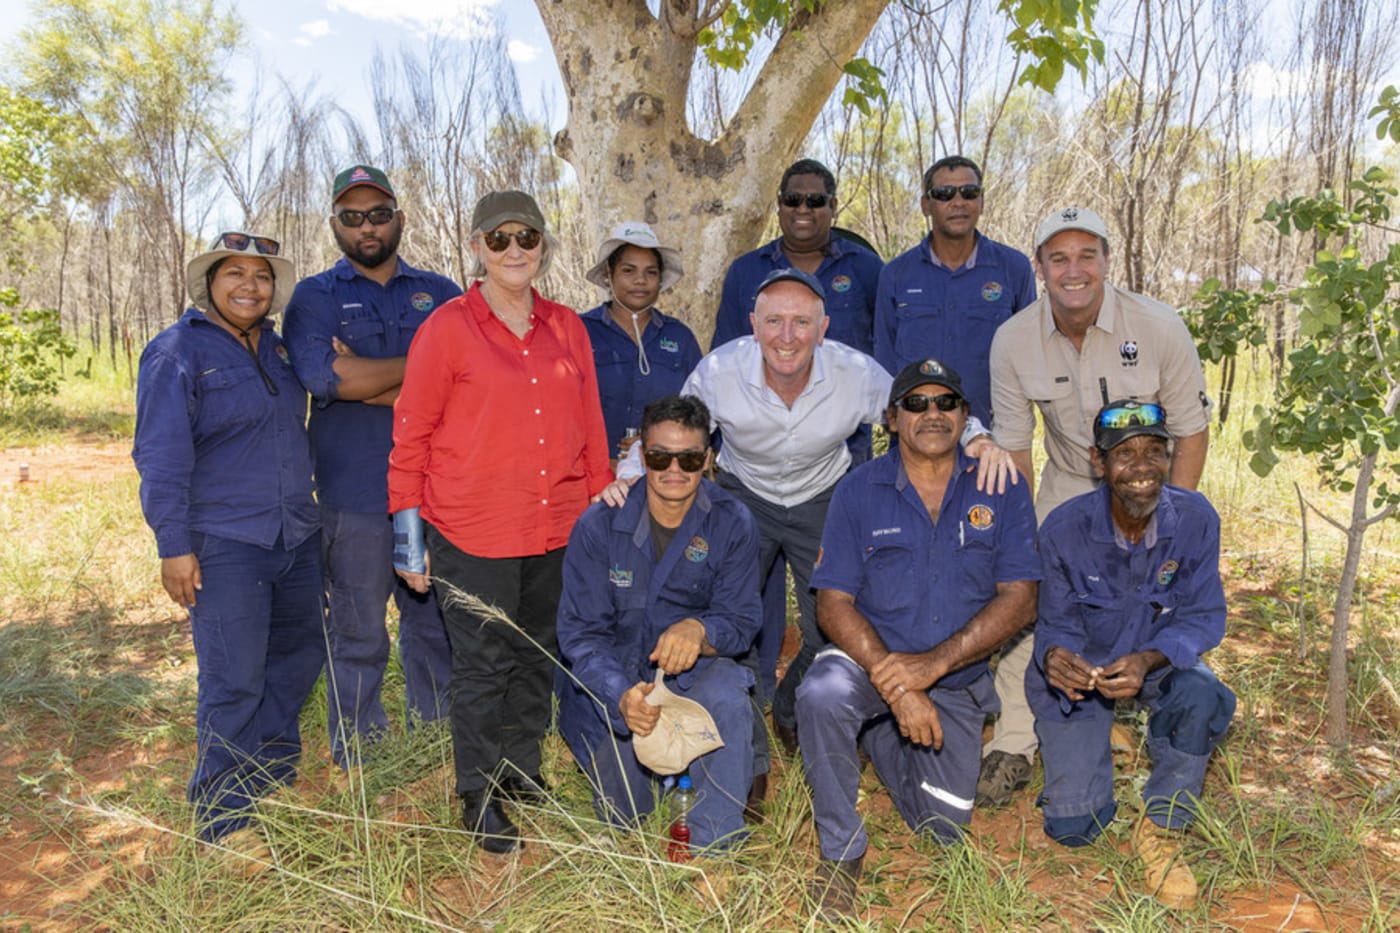 Dermot O'Gorman visits the Kimberley with WA Minister Stephen Dawson and Lotterywest CEO Susan Hunt, hosted by the Yawuru rangers on country